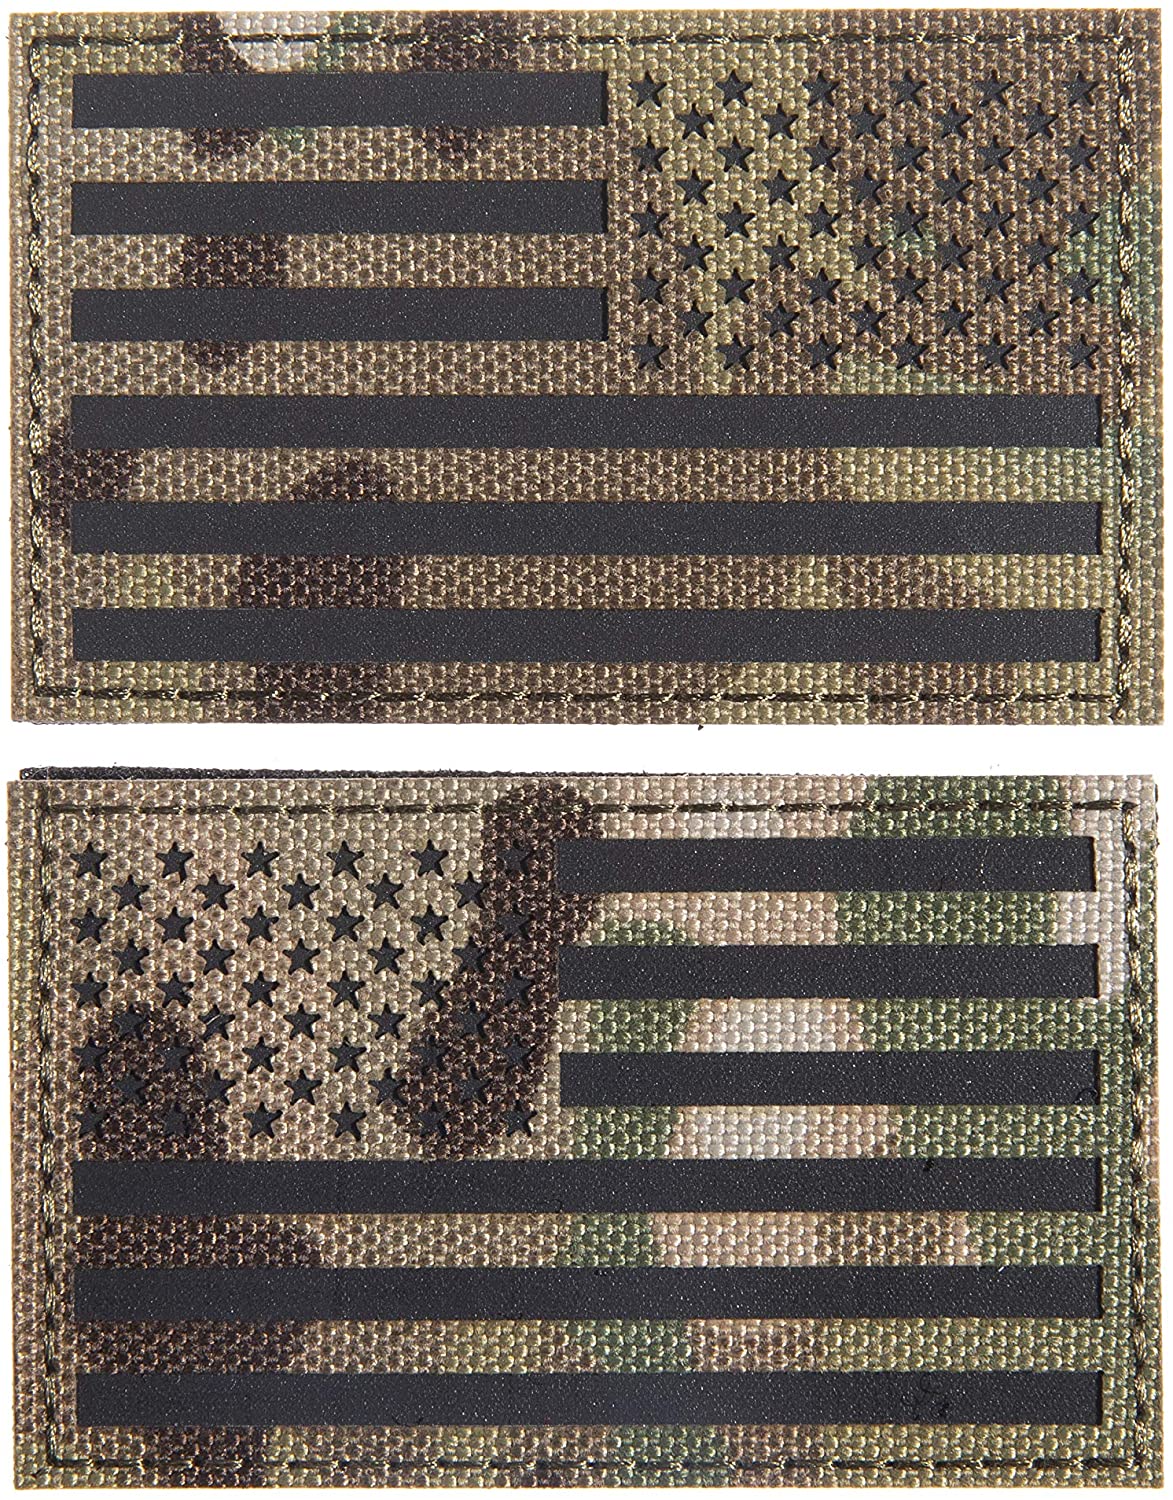 US Flag Patch - Subdued on MultiCam